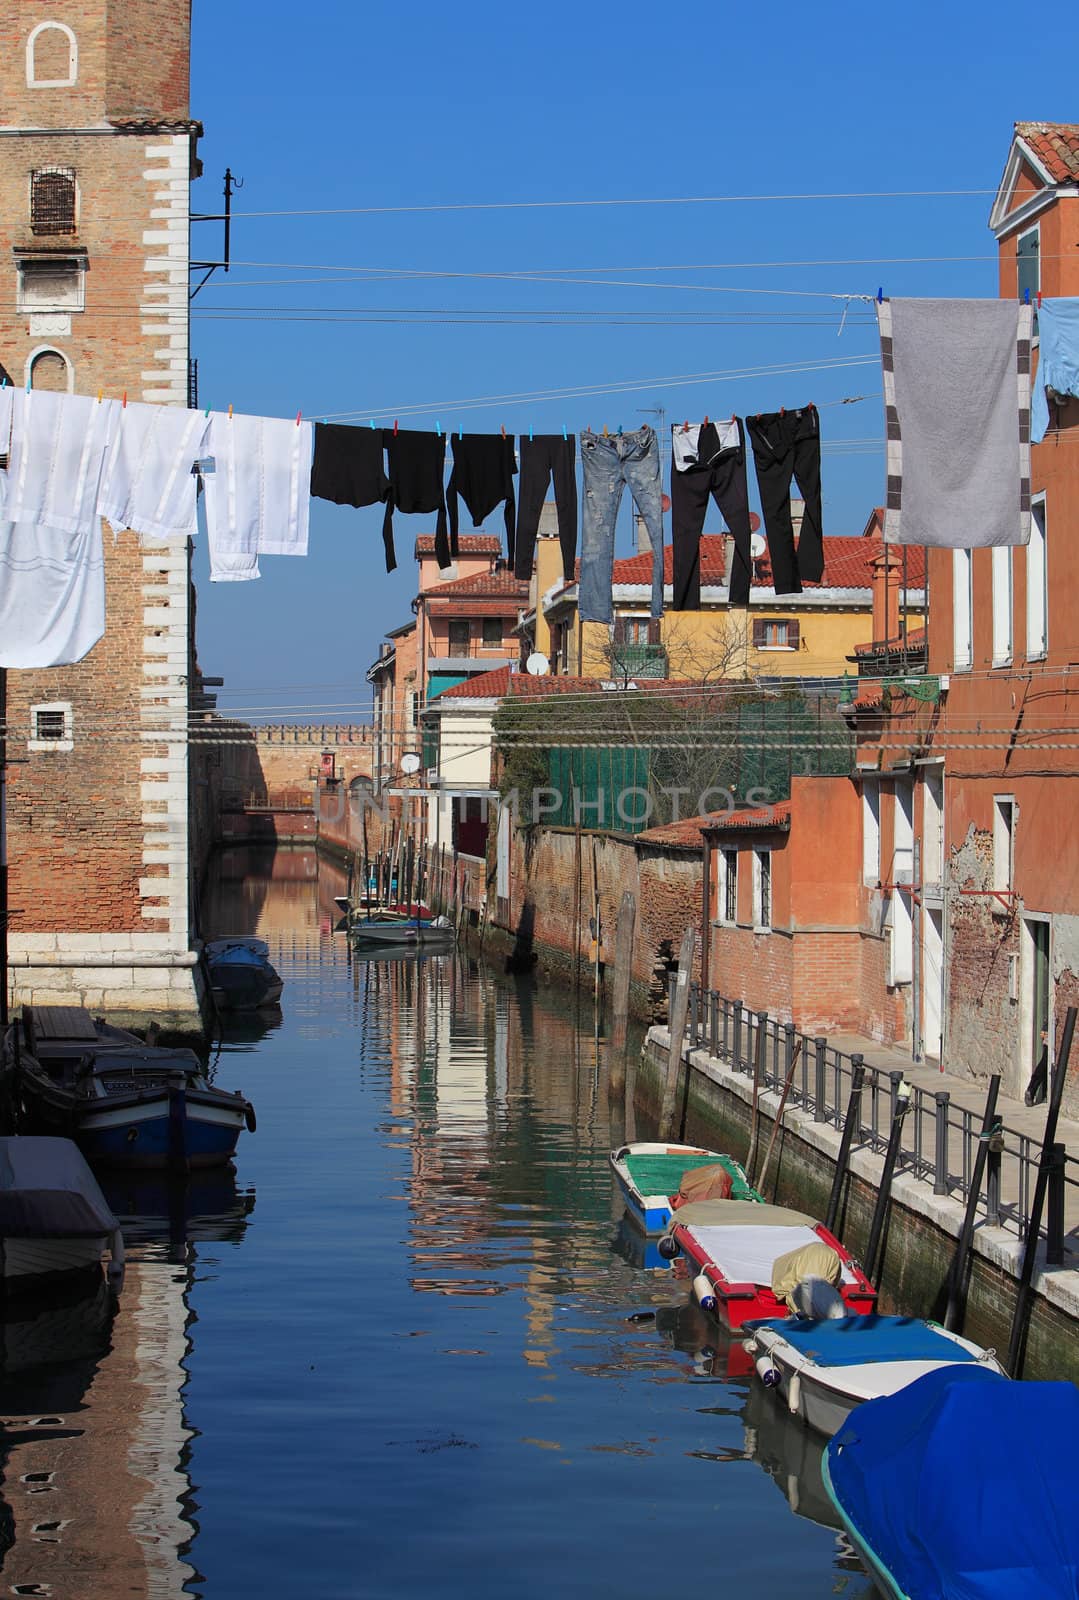 Specific canal with parked boats,specific architecture and clothes hanging out to dry in Venice,Italy.